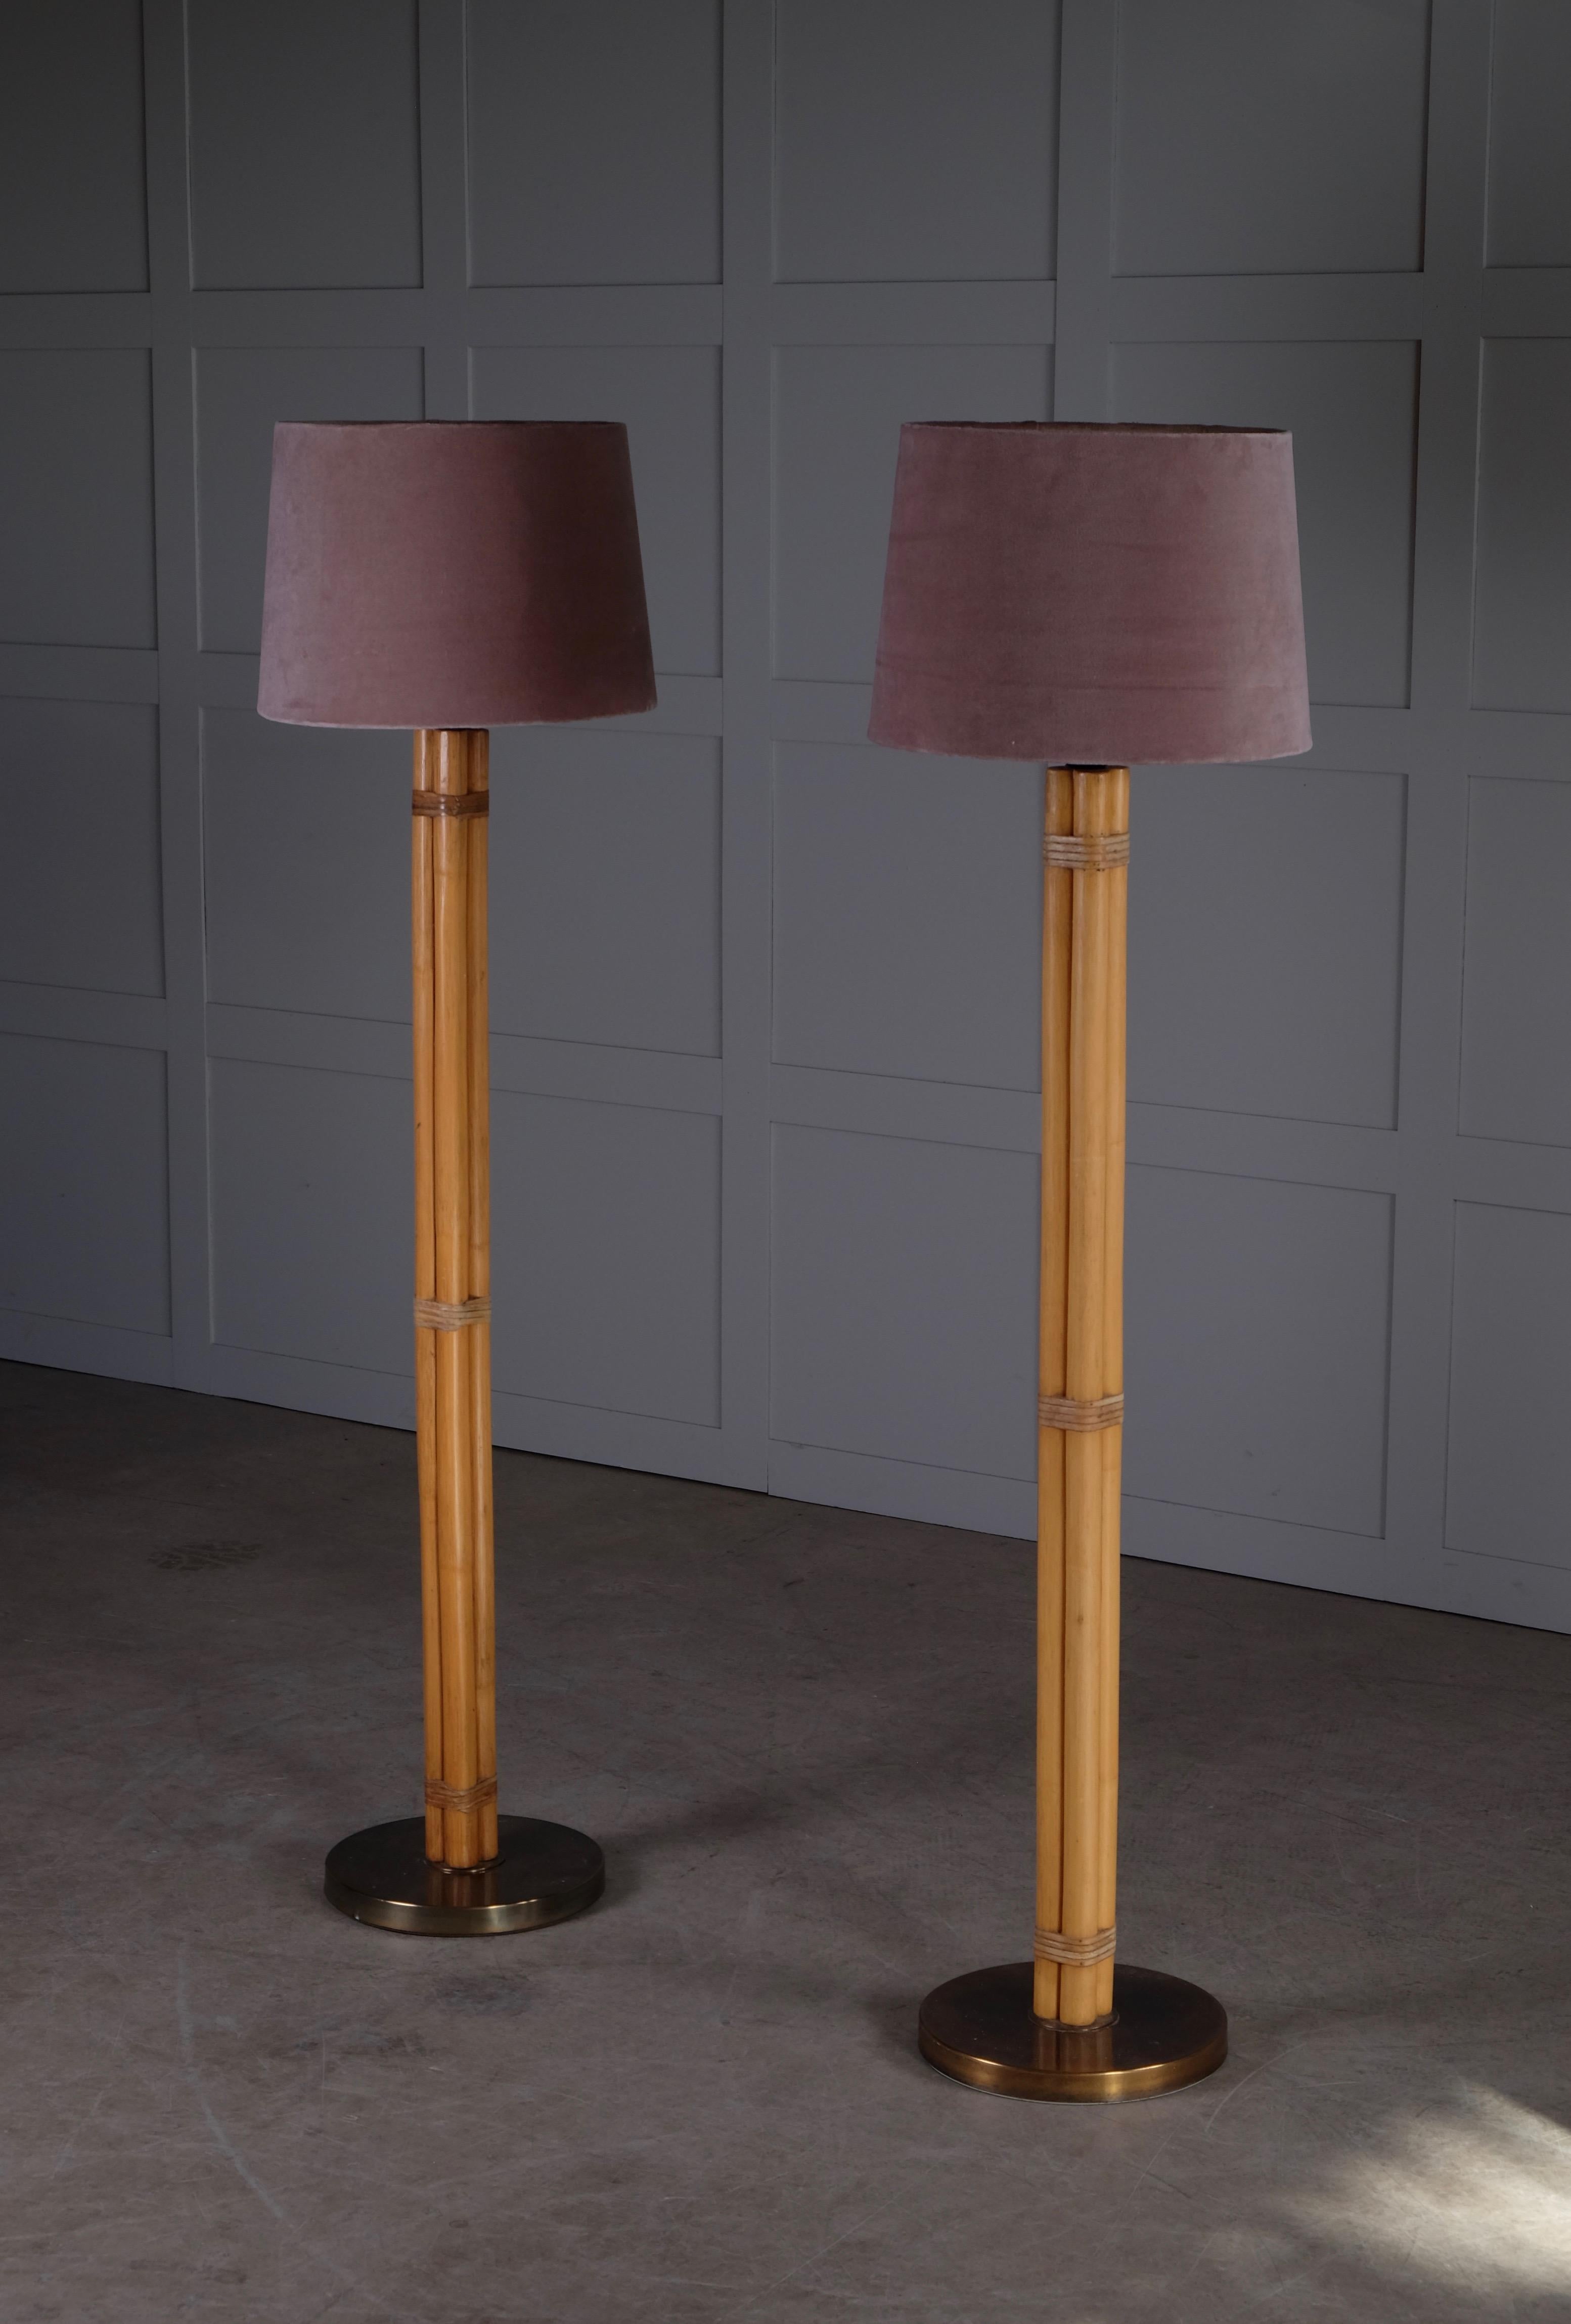 Pair of Swedish Brass and Bamboo Floor Lamps by Bergboms, 1970s For Sale 2